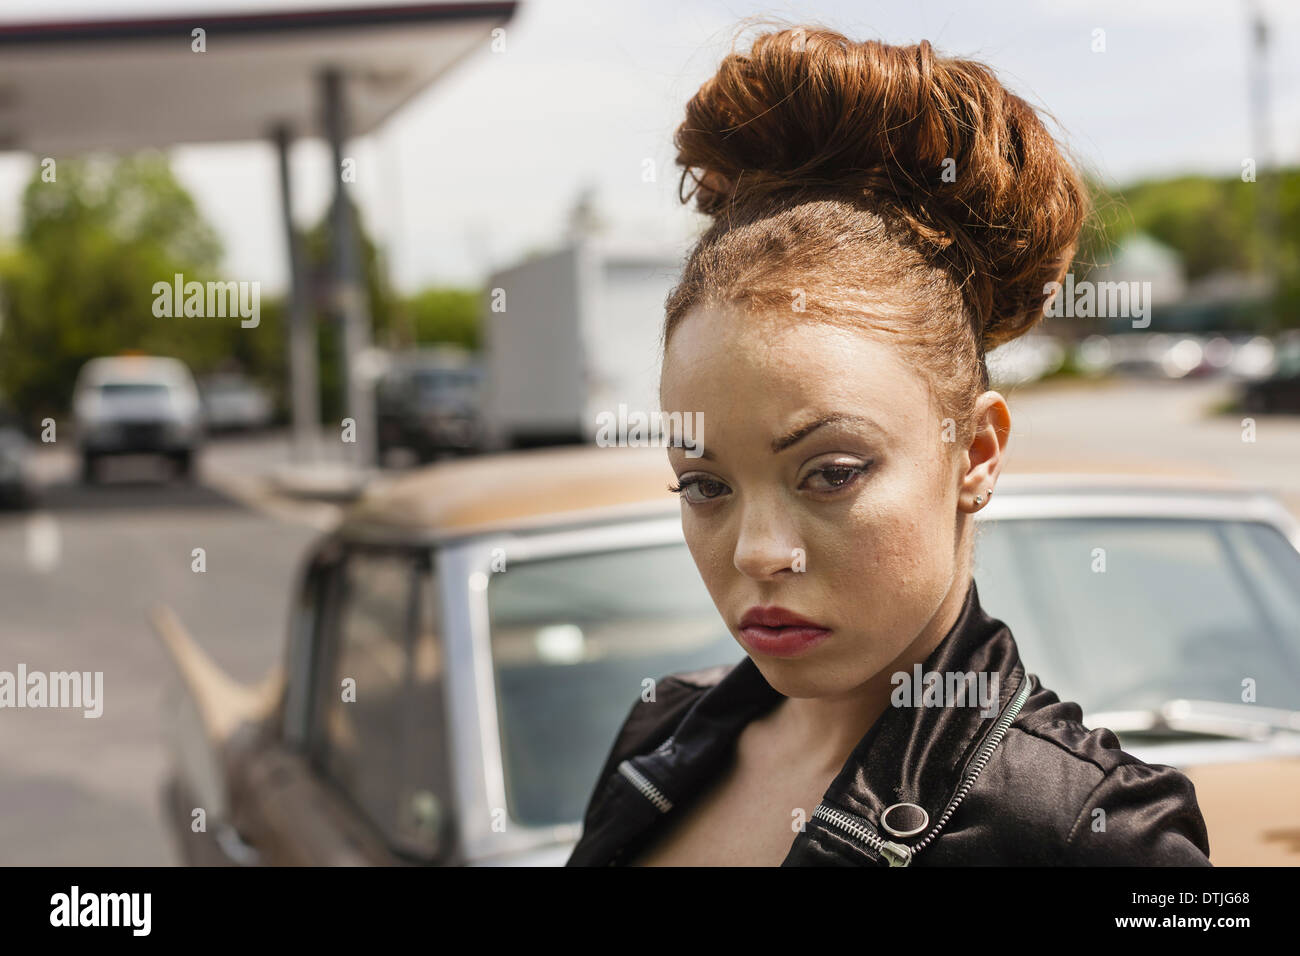 A young woman wearing makeup in a leather jacket  Pennsylvania USA Stock Photo